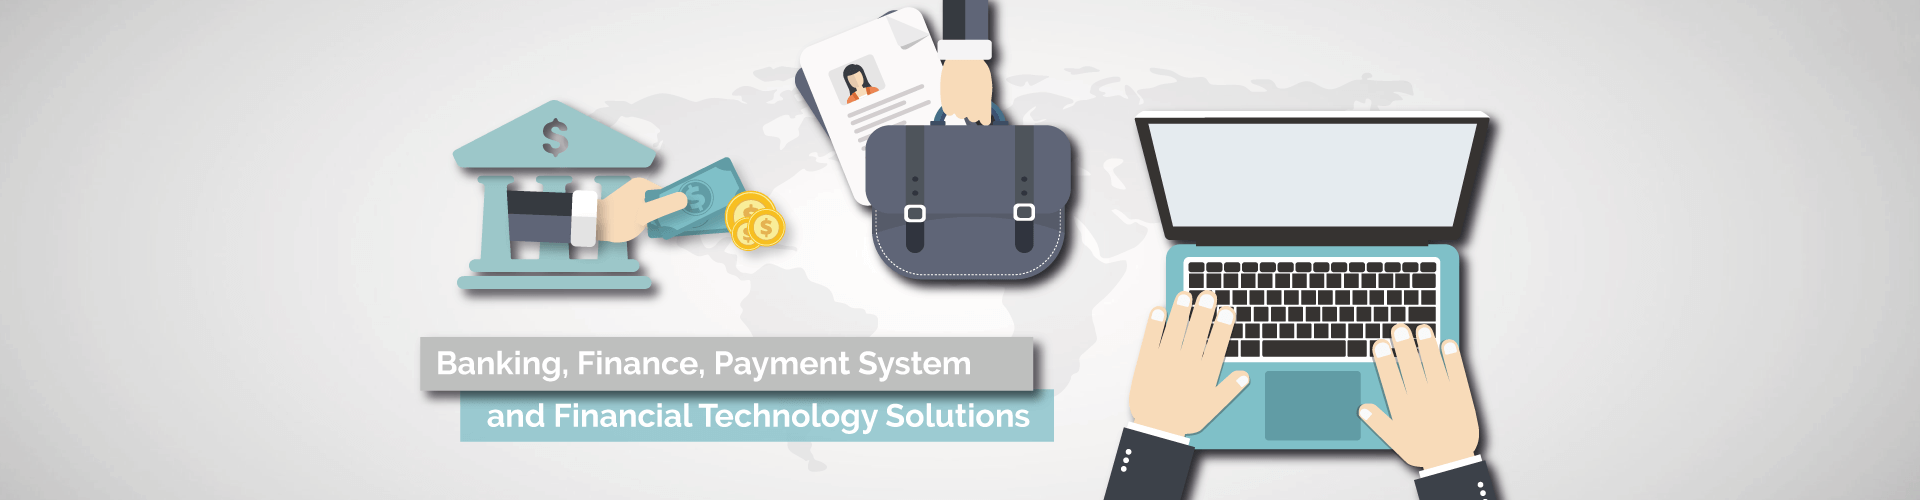 Banking Finance Payment System